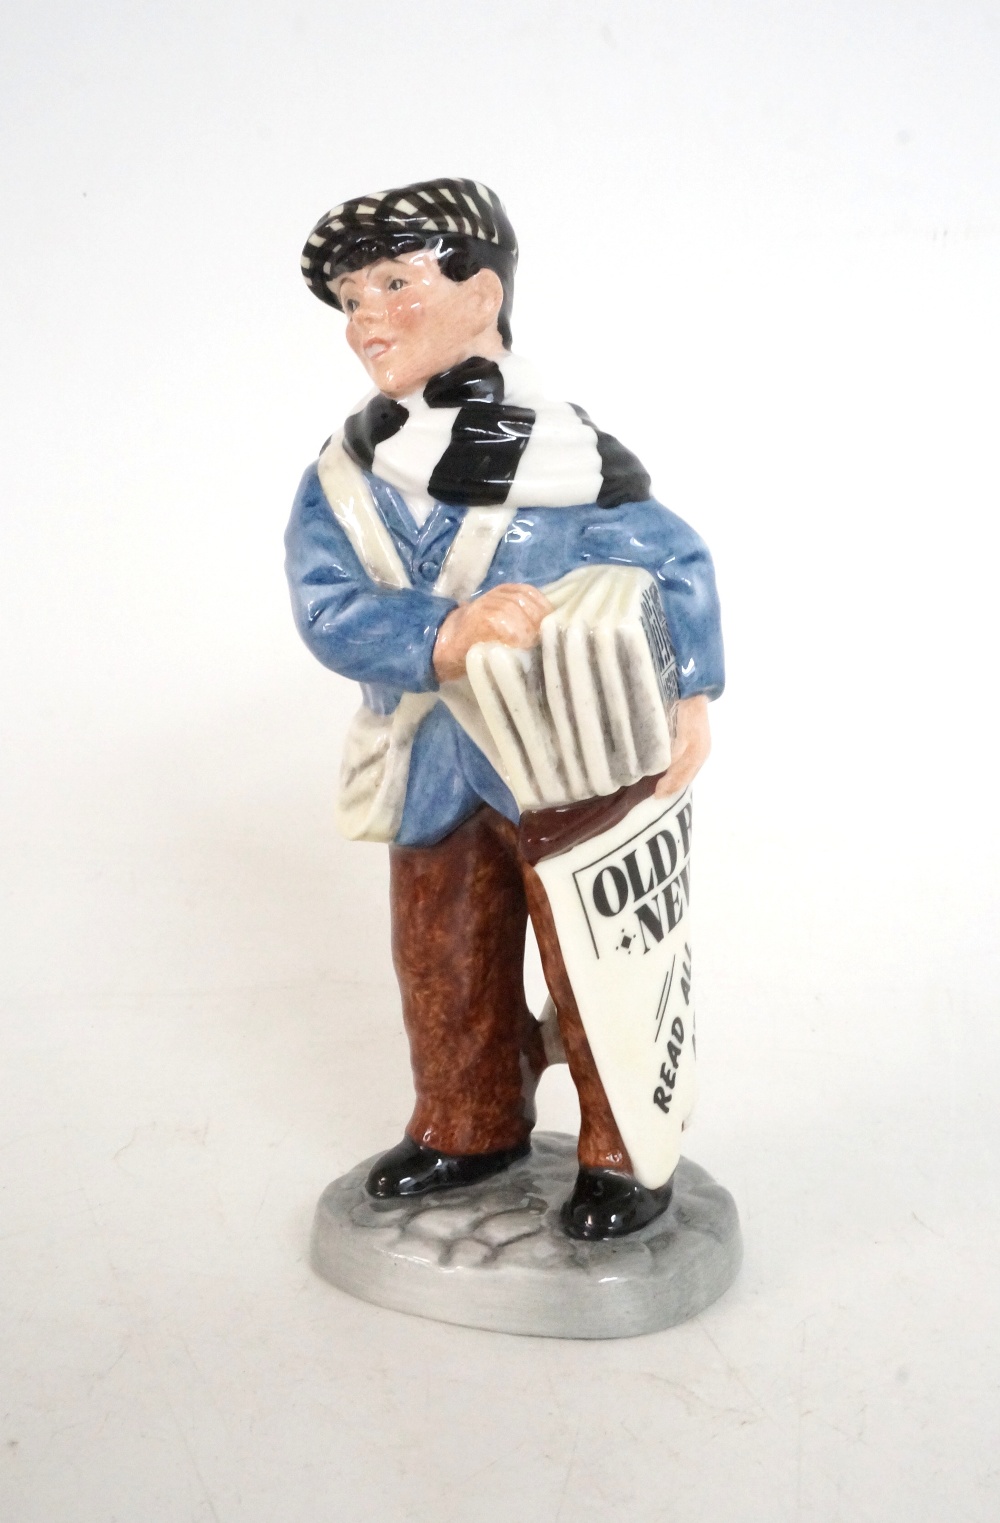 ROYAL DOULTON FIGURINE OF OLD BEN
HN3190, standing selling newspapers, numbered 983 of 1500,